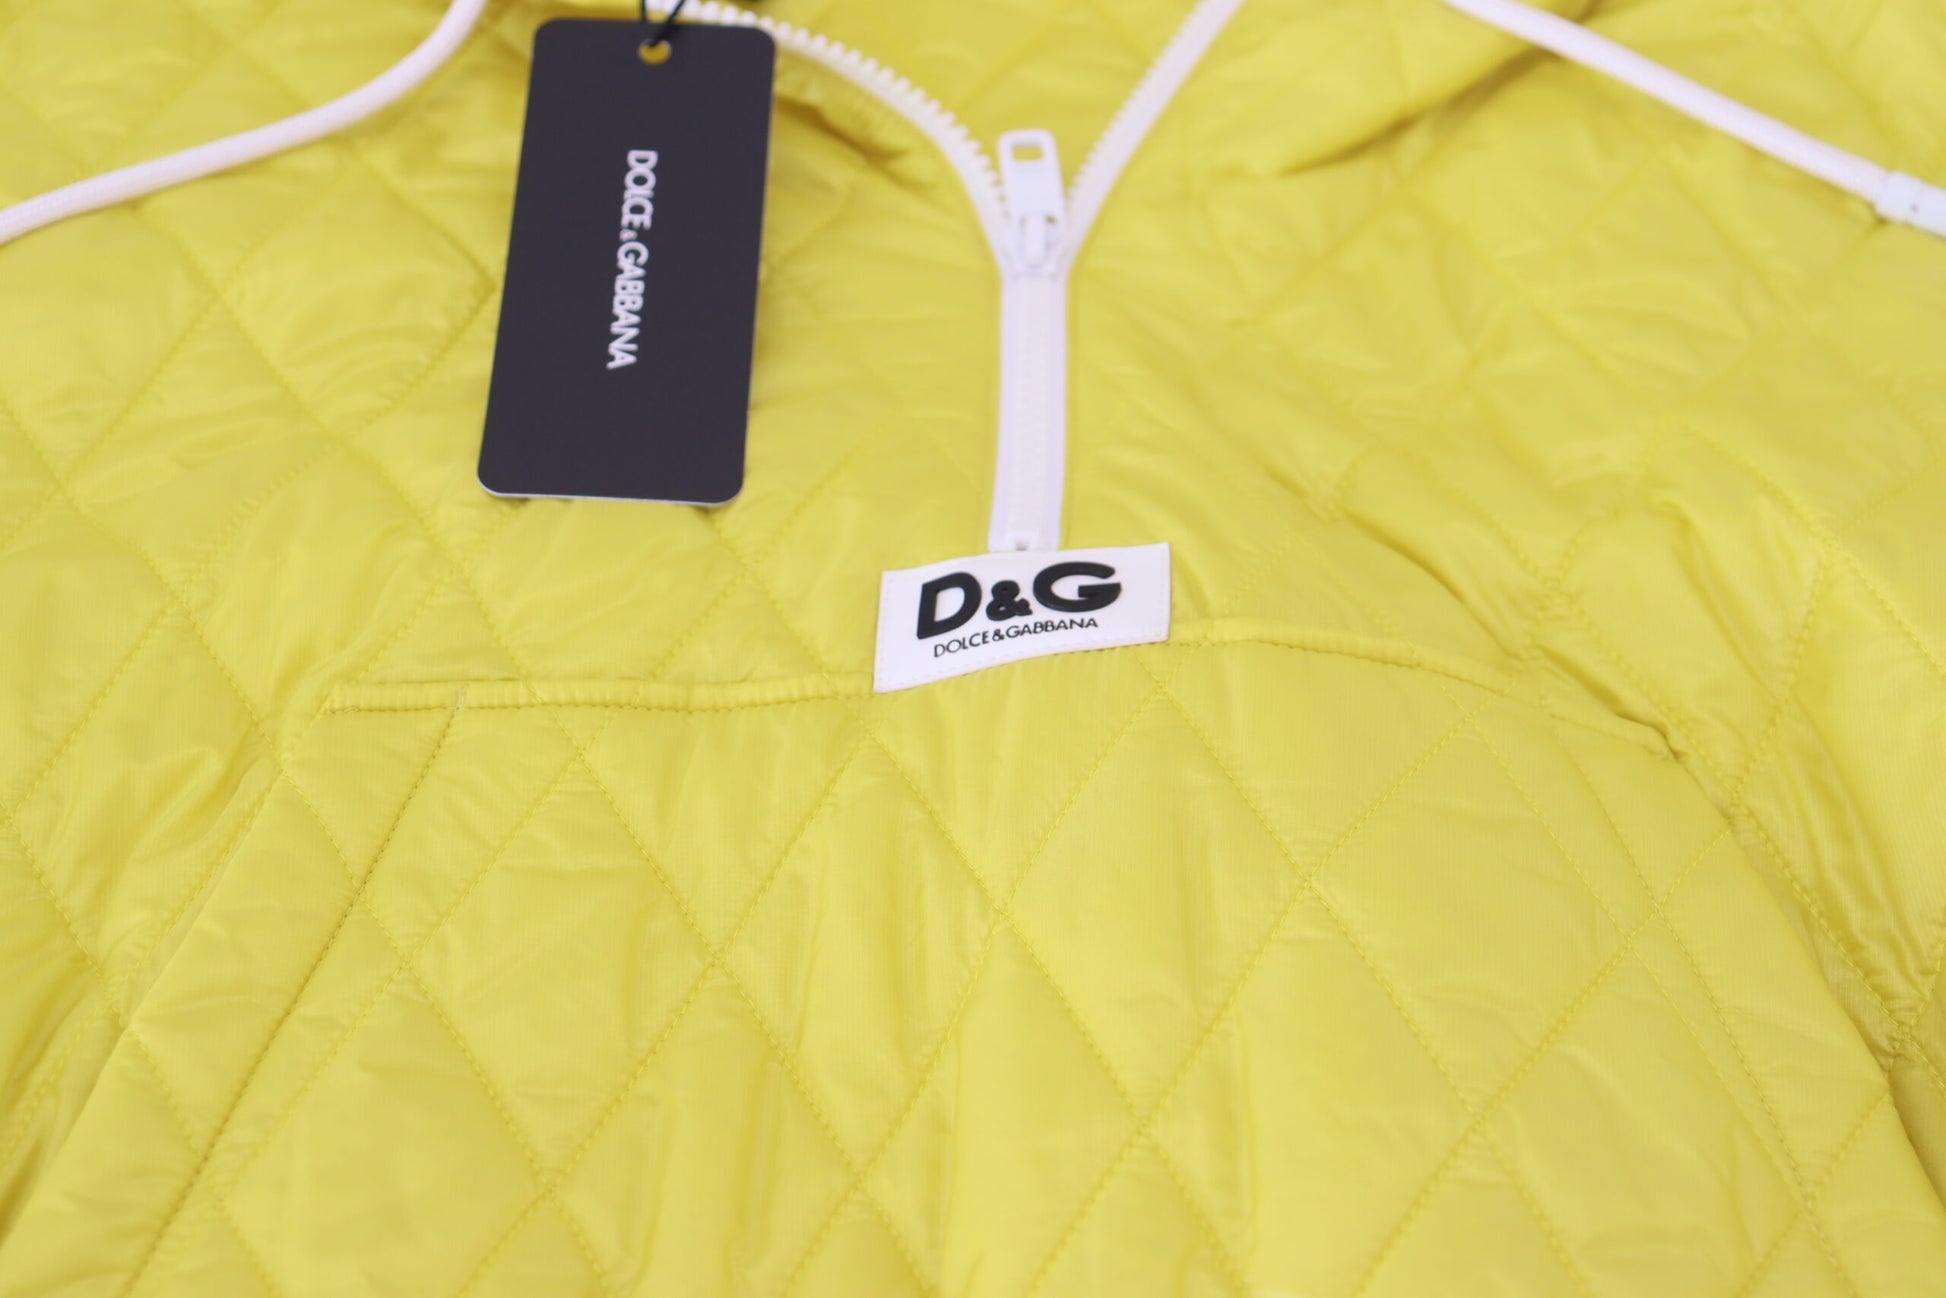 Dolce & Gabbana Yellow Nylon Quilted Hooded Pullover Jacket - Designed by Dolce & Gabbana Available to Buy at a Discounted Price on Moon Behind The Hill Online Designer Discount Store